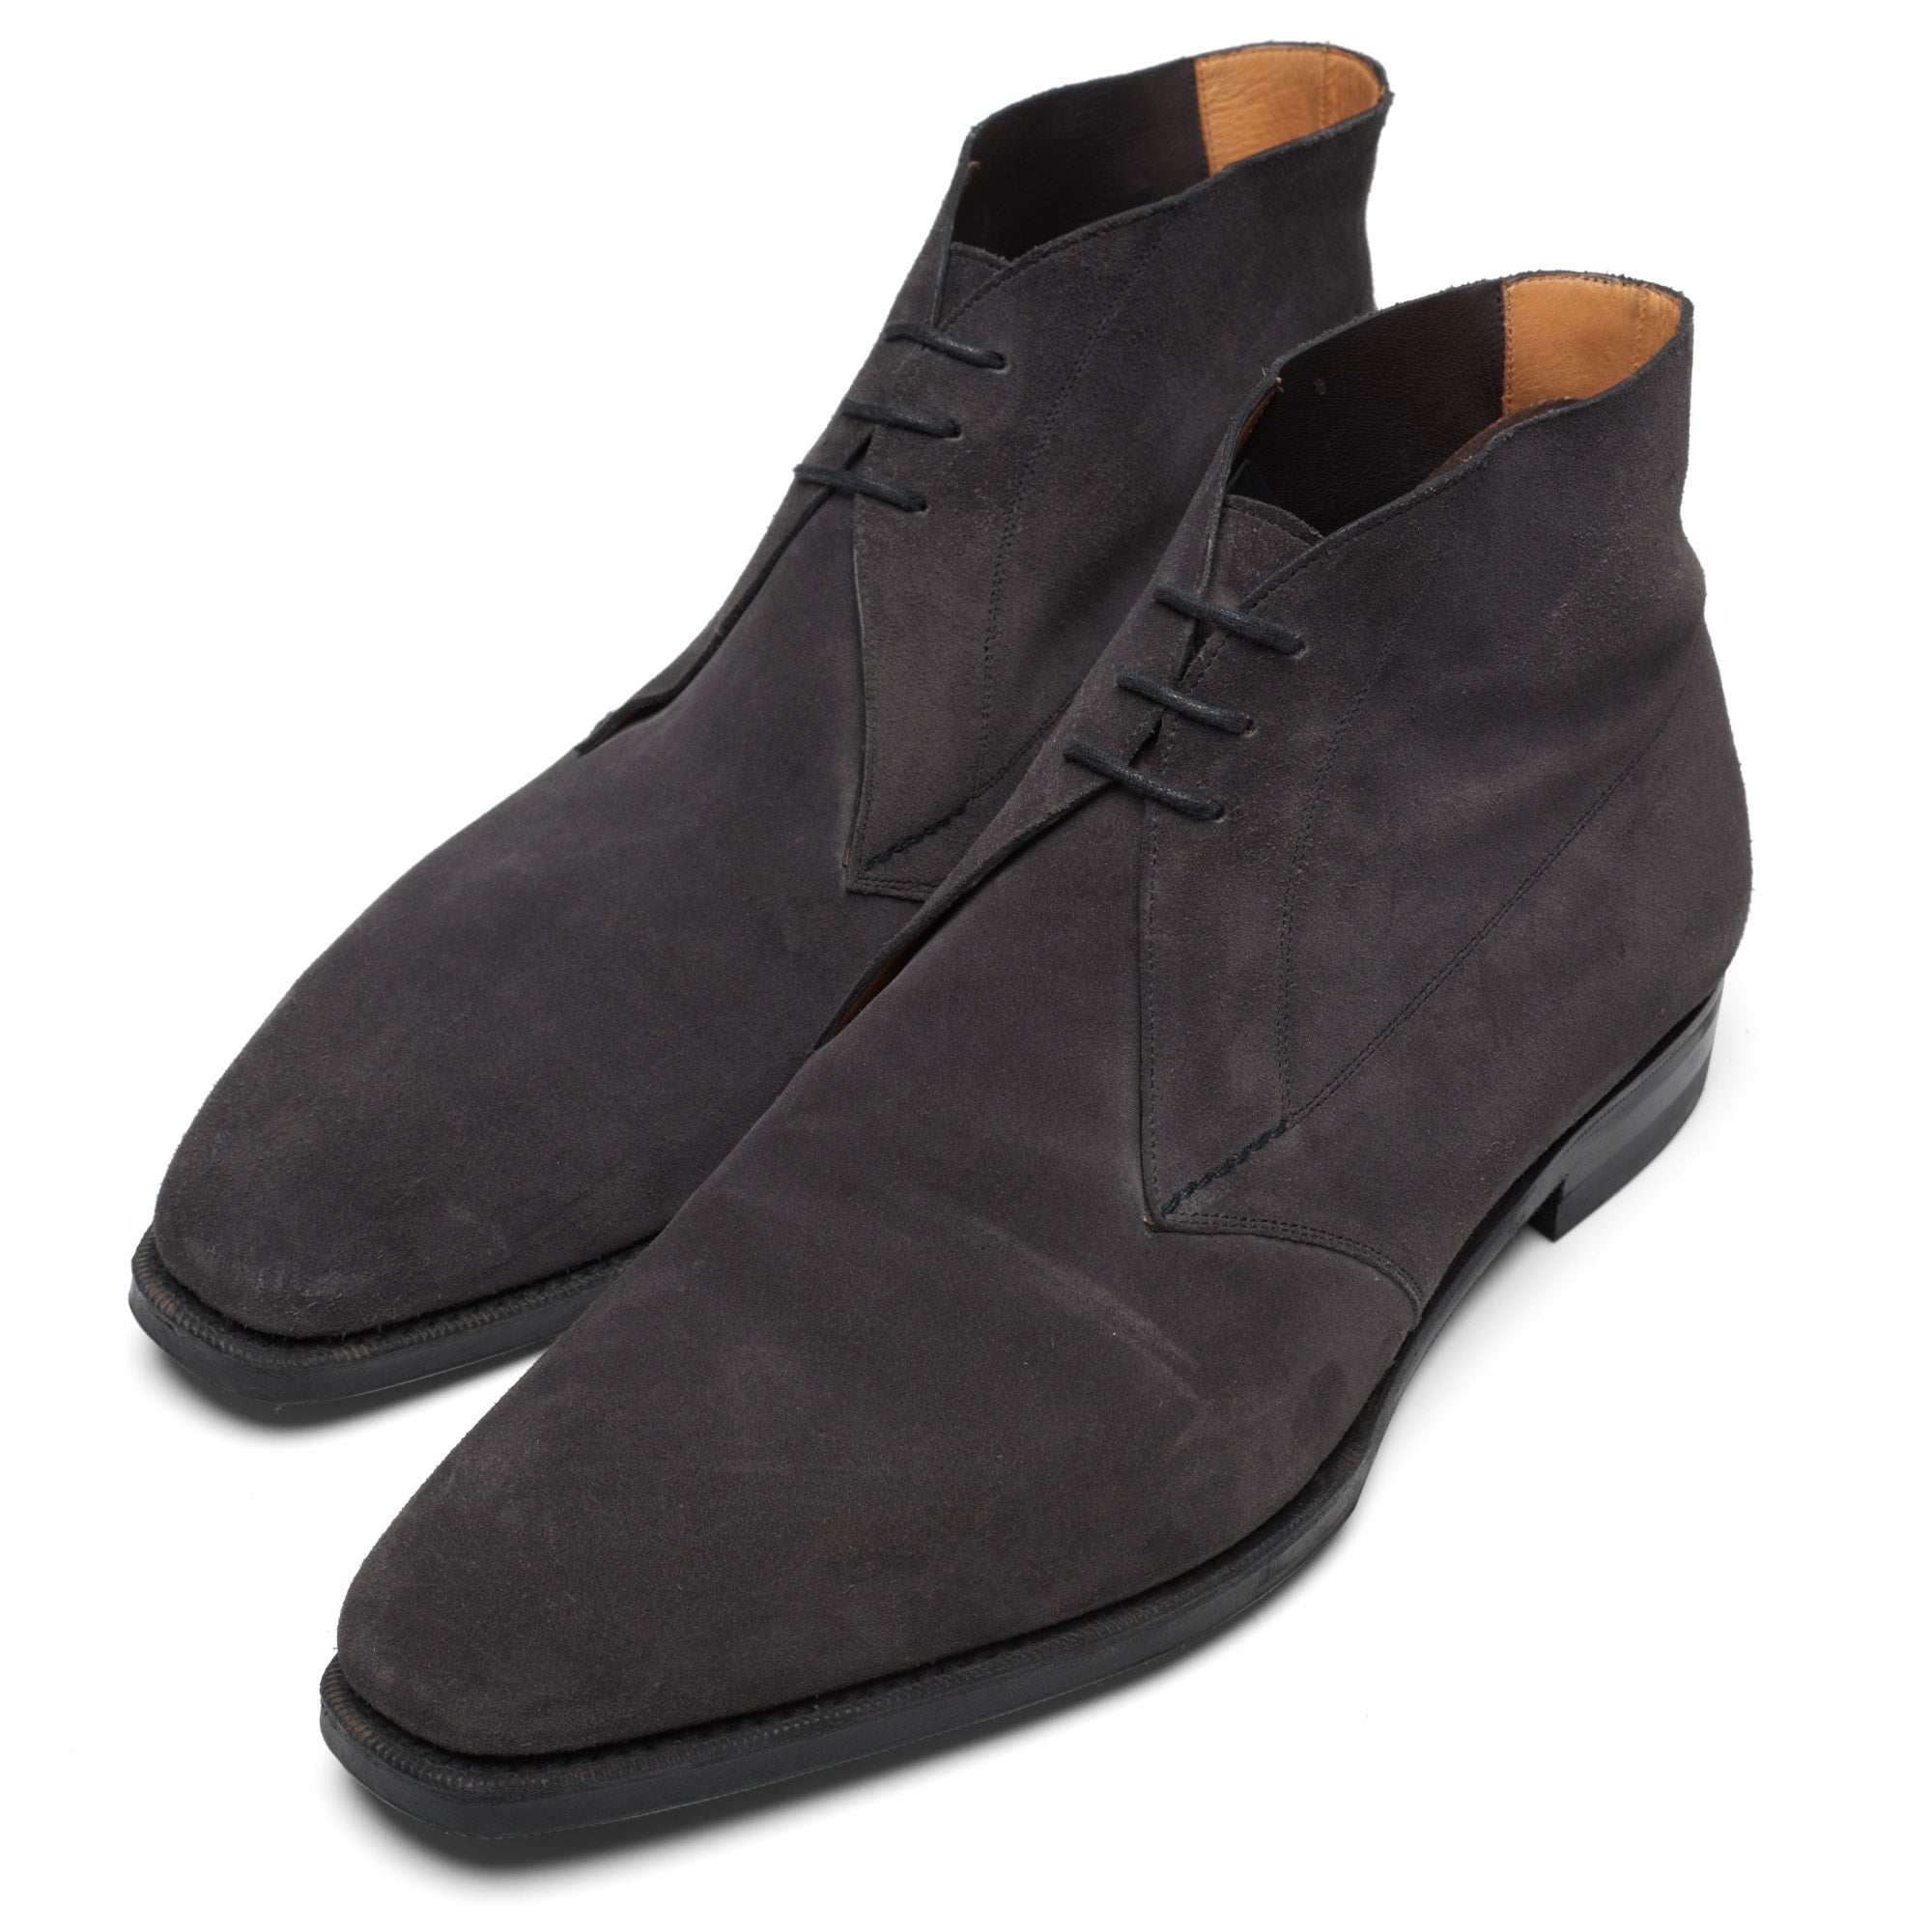 GAZIANO & GIRLING "Arran" Gray Suede Leather Chukka Boots UK 8E US 8.5 Last MH71 GAZIANO & GIRLING